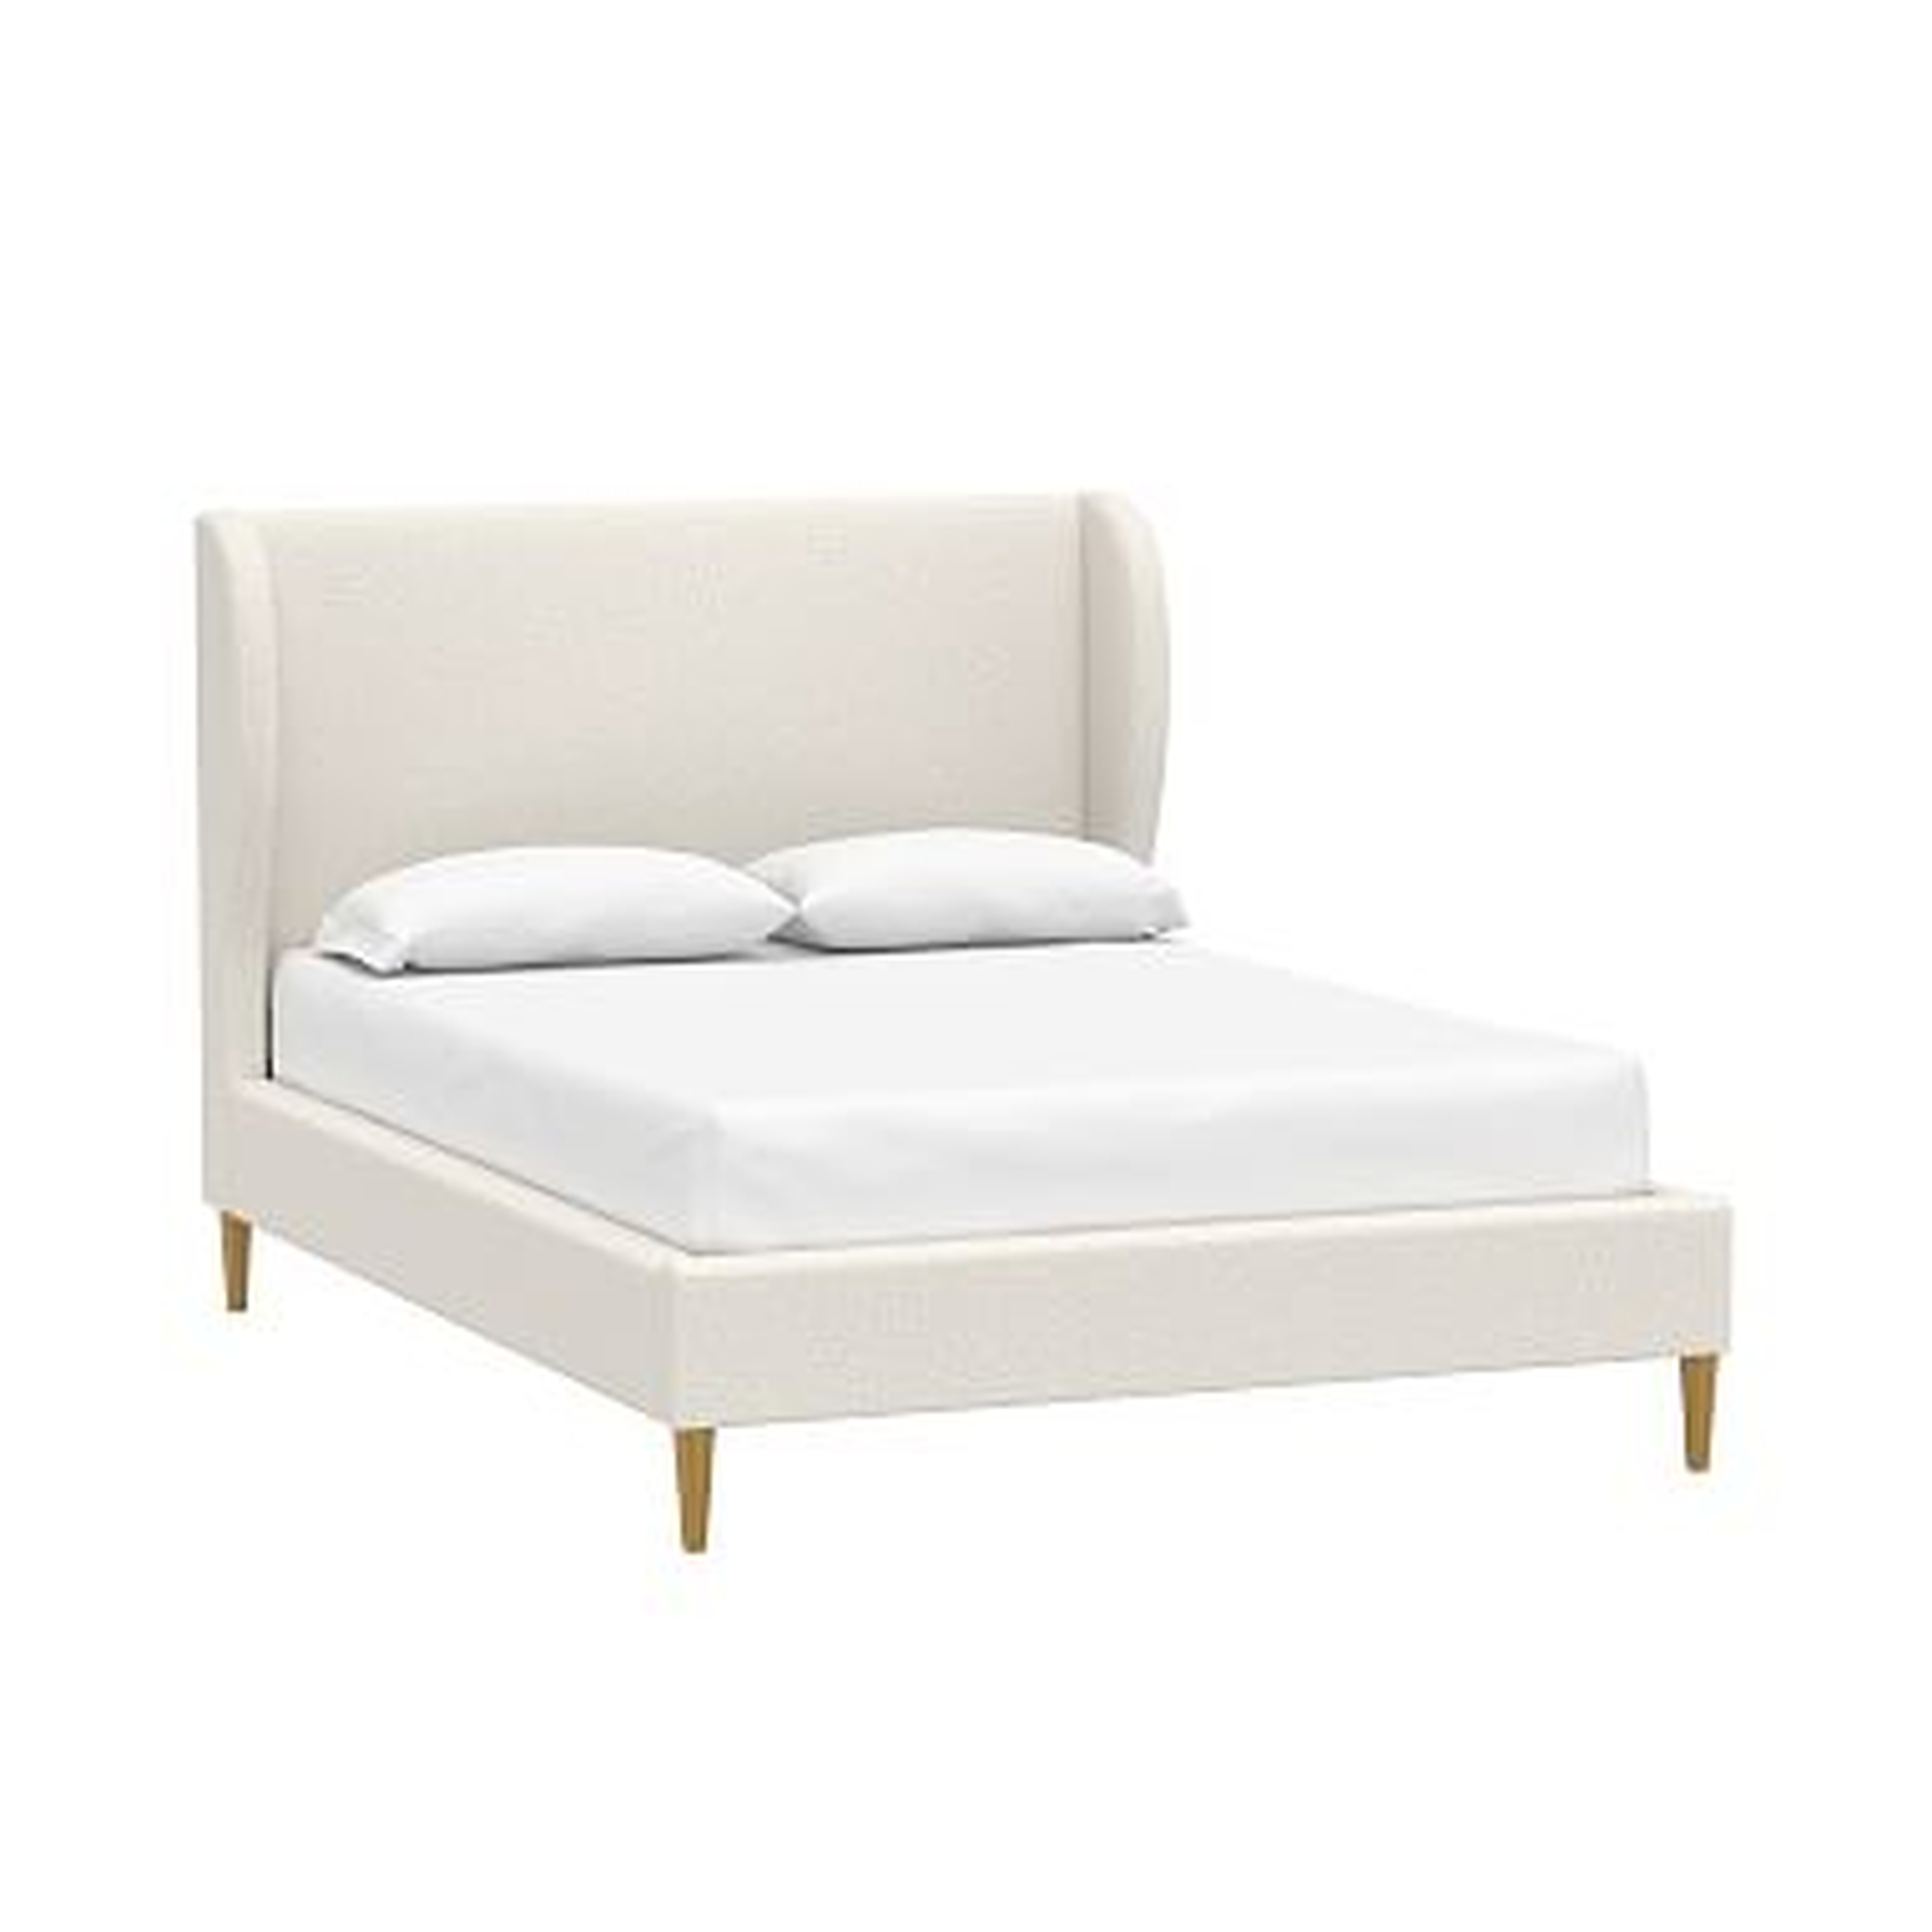 Wren Wingback Upholstered Bed, King, Tweed Ivory - Pottery Barn Teen